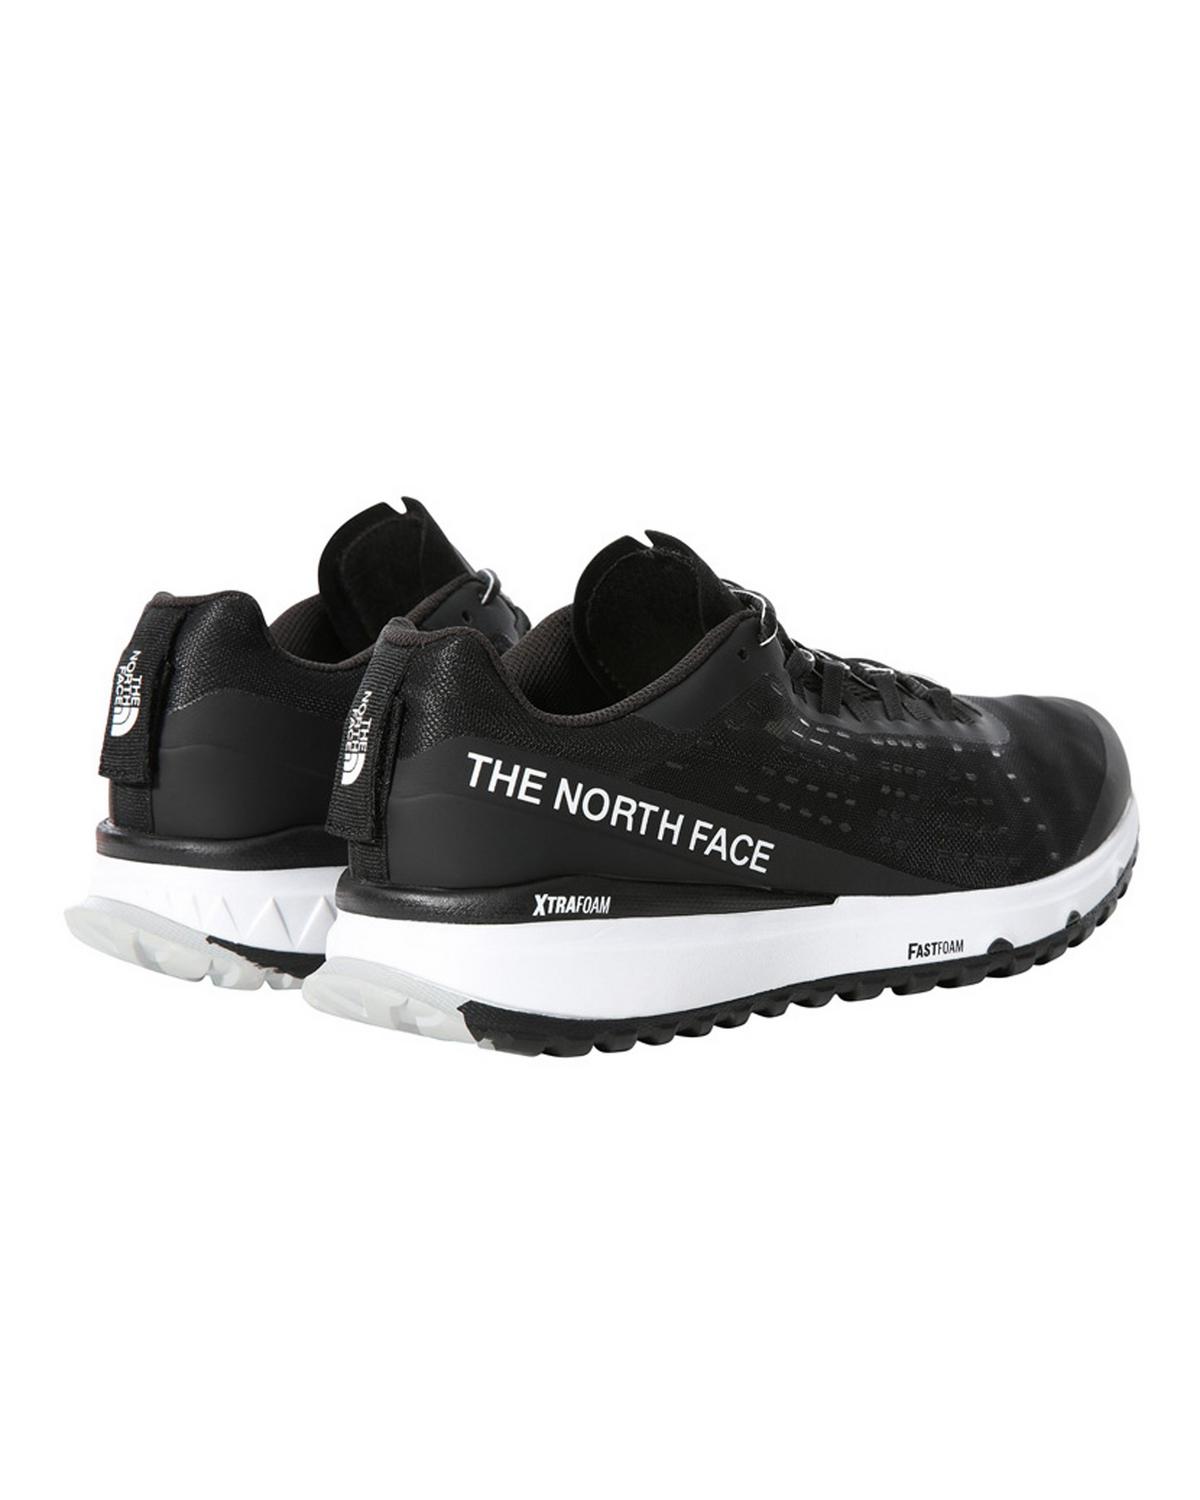 The North Face Men's Ultra Swift Trail Running Shoes -  Black